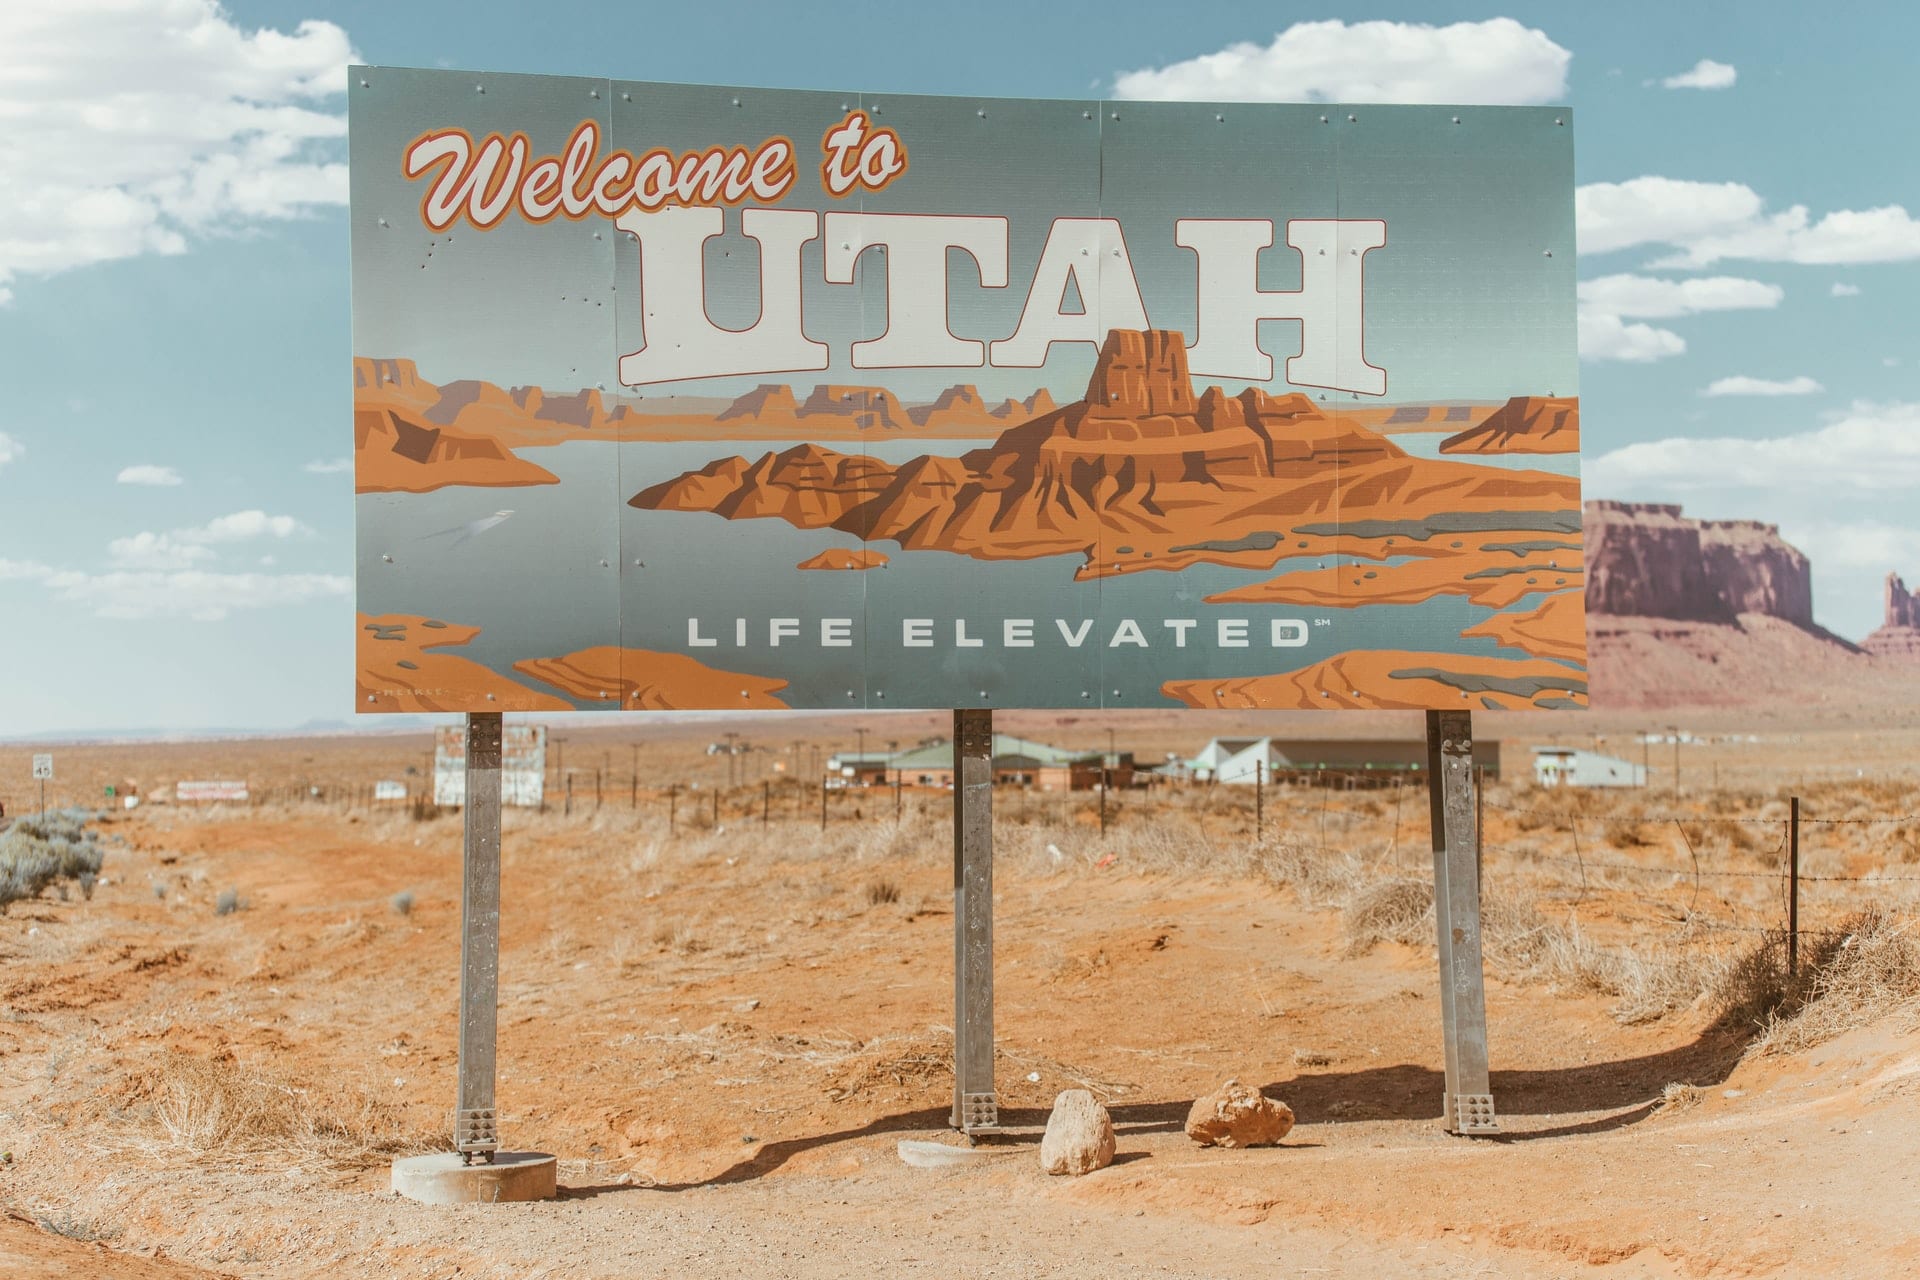 taylor brandon 5T2Lz9bYRCU unsplash - Relocating To Utah? Here’s What You Need To Know